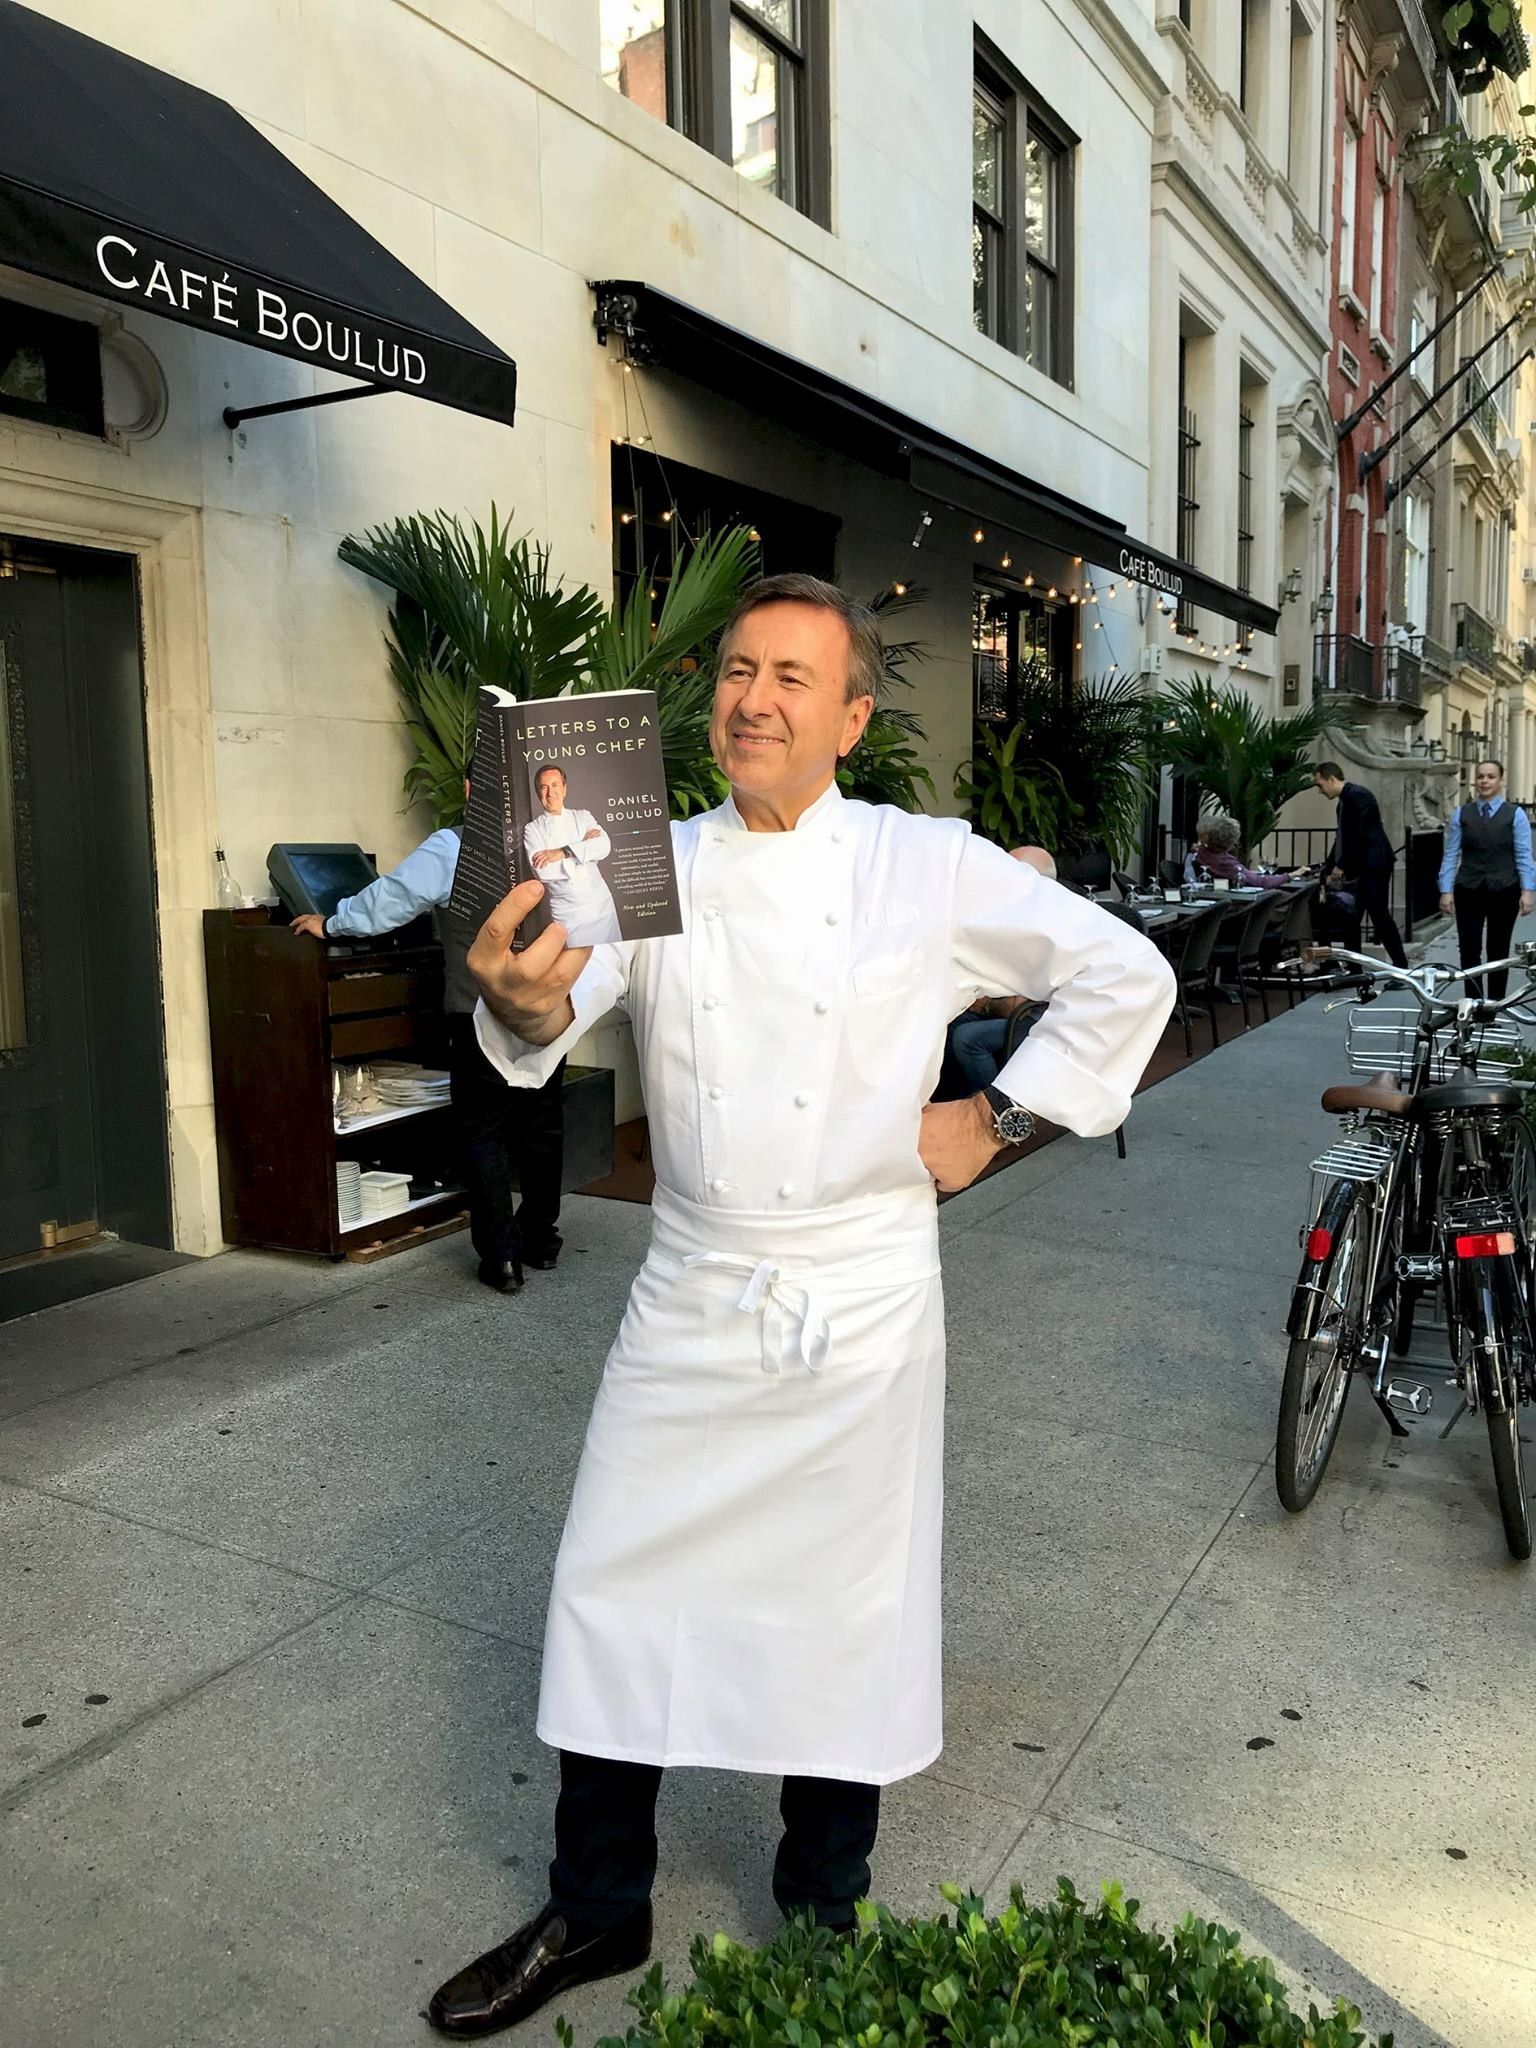 How Daniel Boulud Became The  Widely Celebrated Chefs And  Ones Of America’s Leading Culinary Authorities.